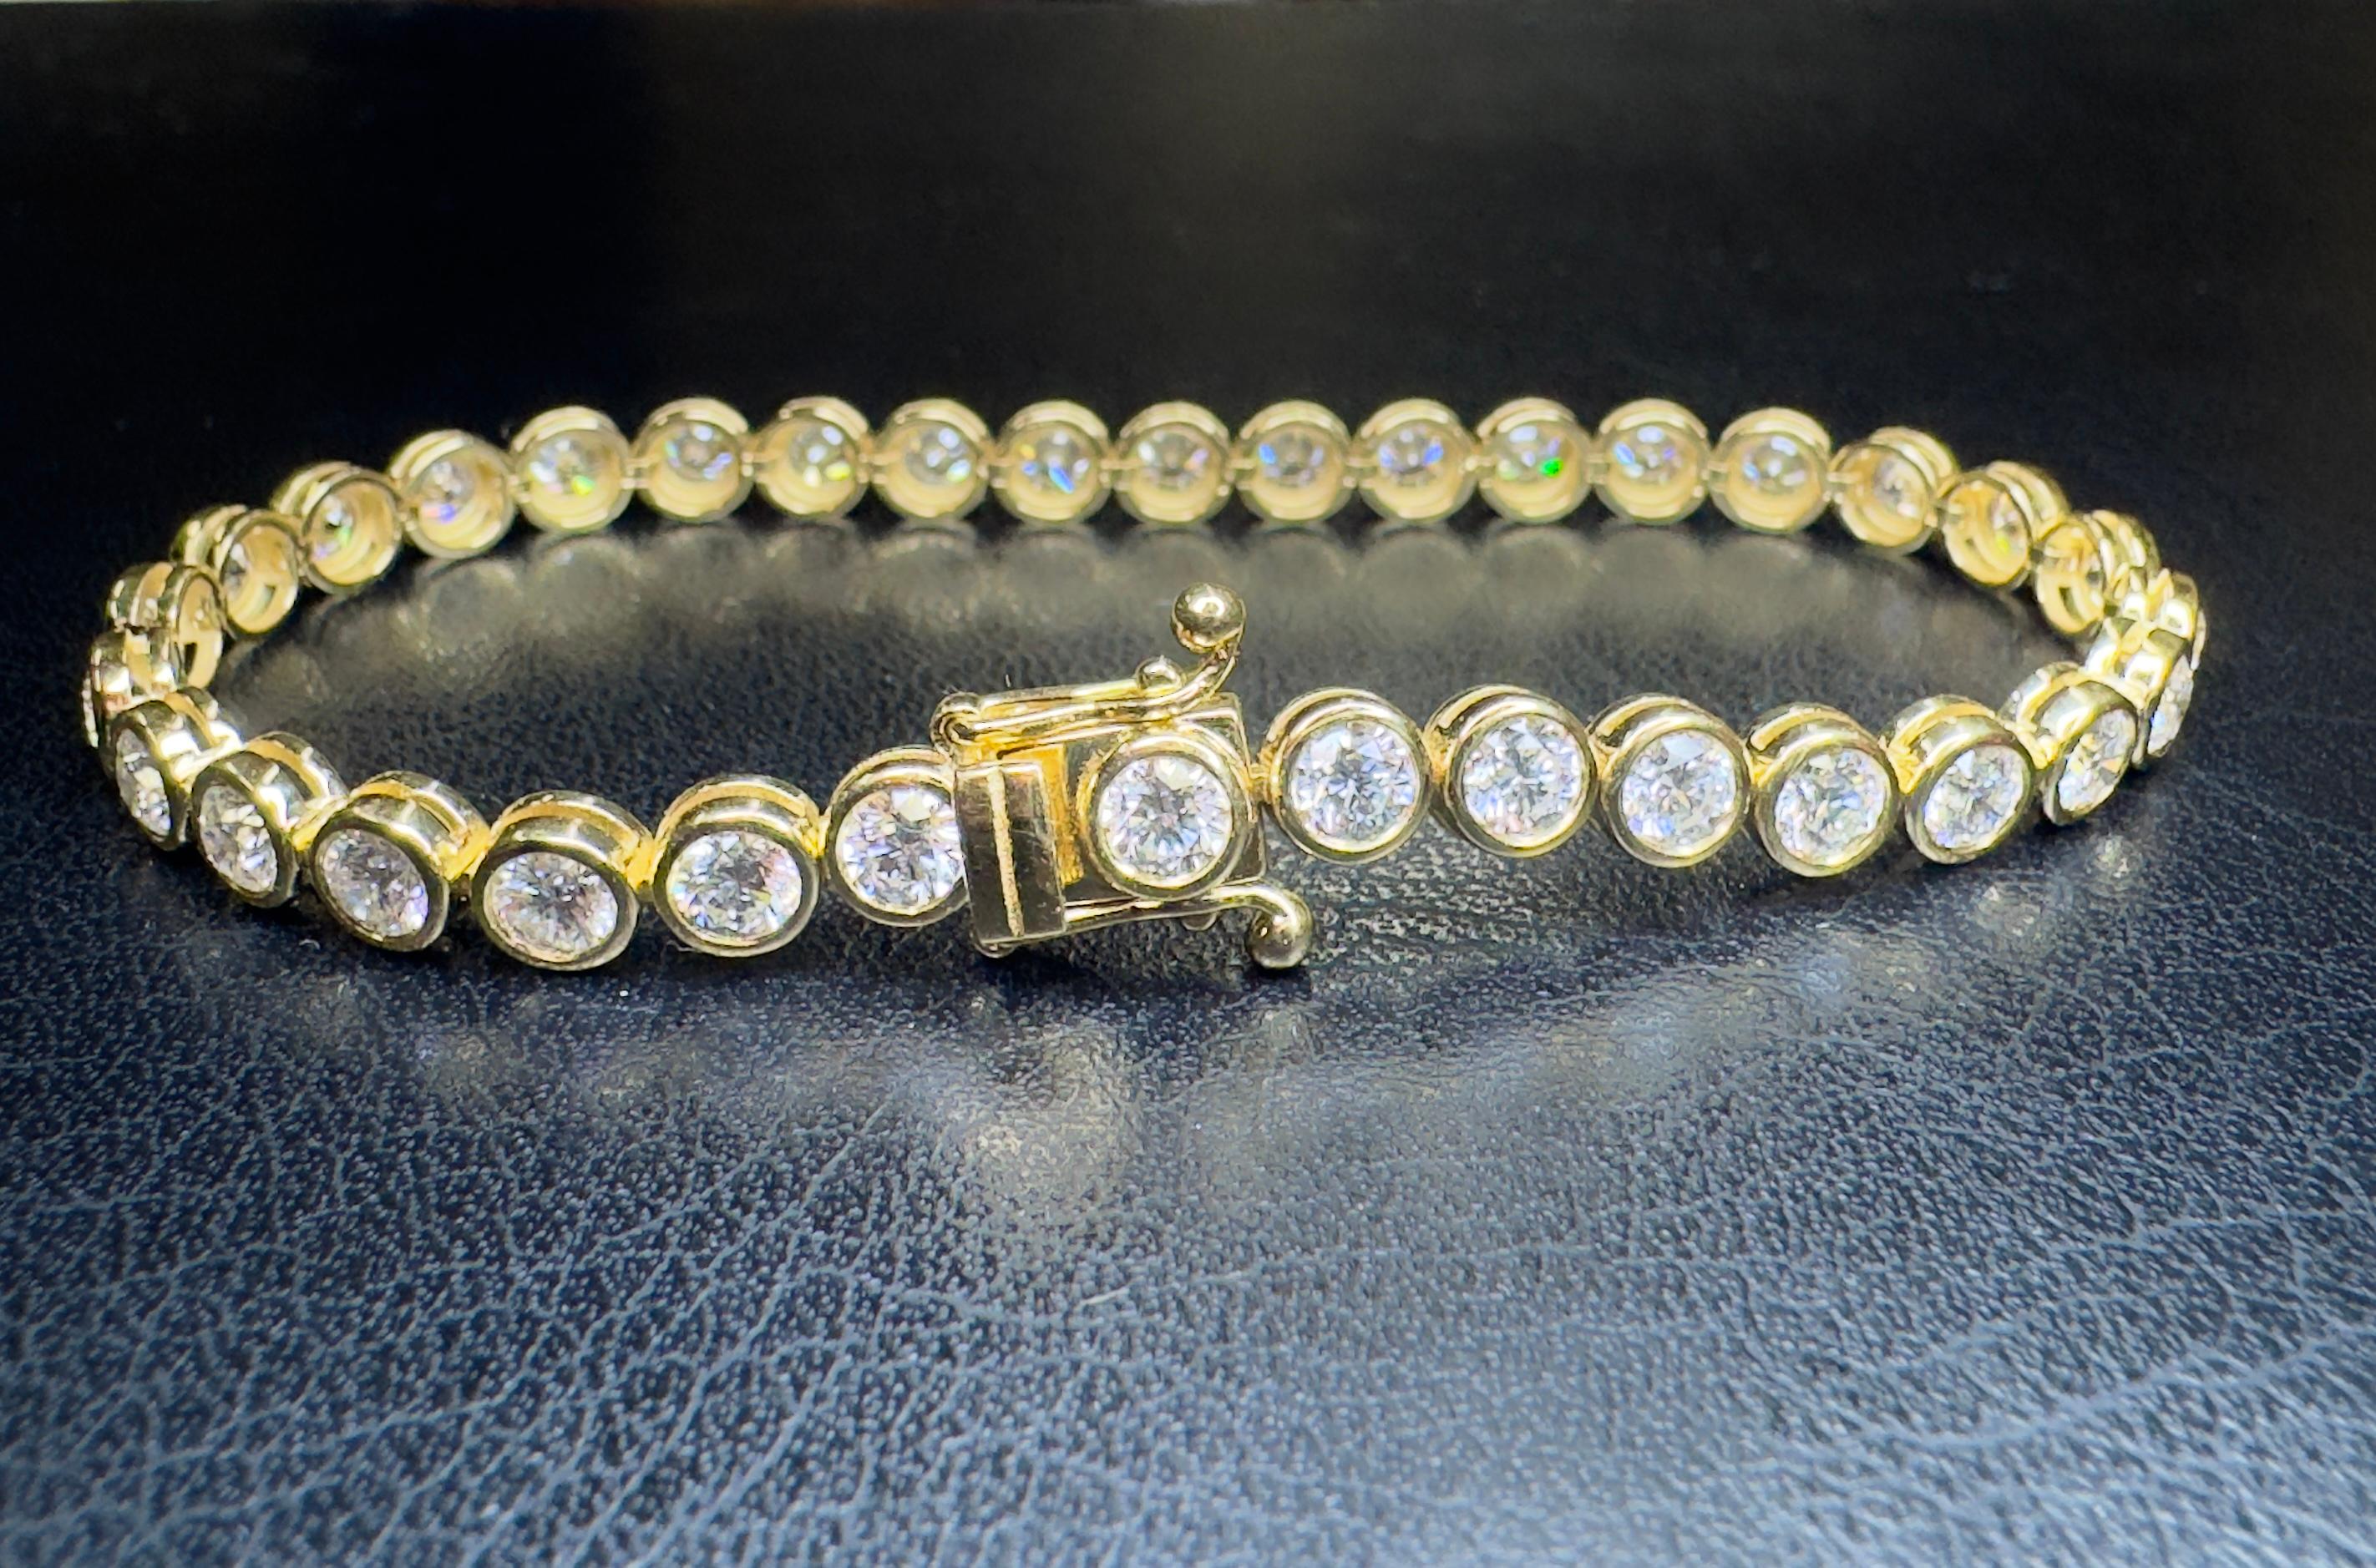 Elegant natural diamond tennis bracelet features 34 round brilliant diamonds, 5.40 carats. DEF color and VS1-SI1 clarity. Bezel set in 18 karat yellow gold with a double secured lock. Bracelet measures 6.75 inches in length and the total jewelry